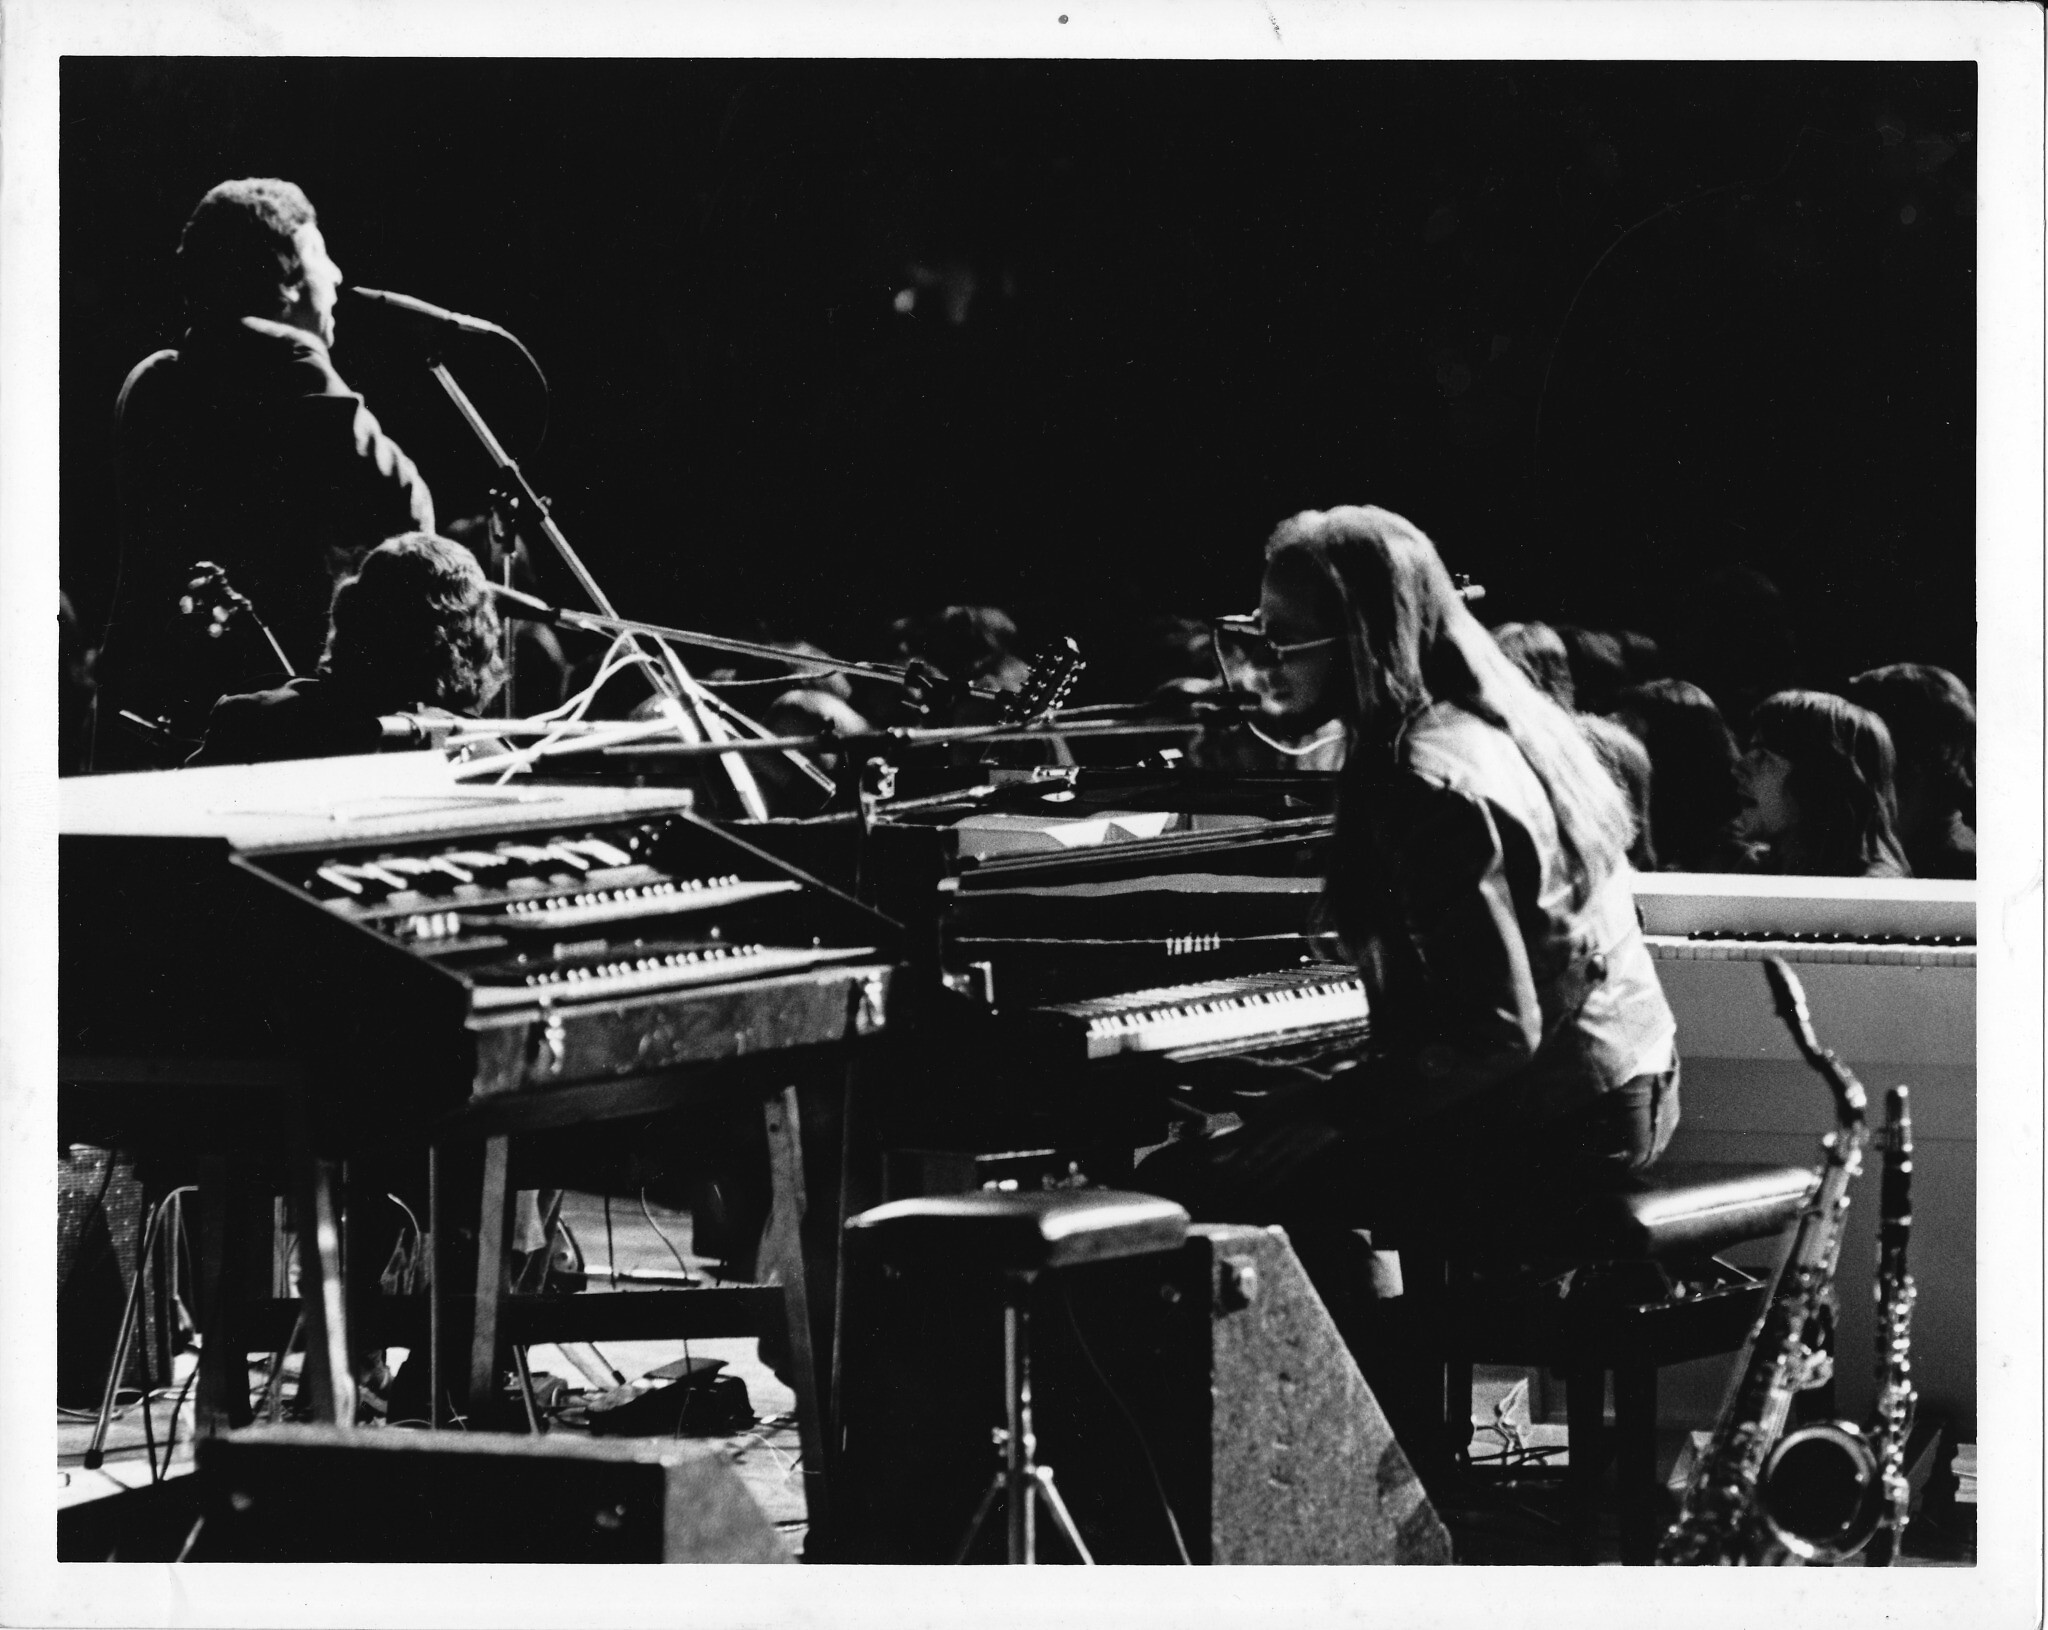 John Lissauer on keyboard and Leonard Cohen singing in a 1974 concert performance during the New Skin for the Old Ceremony tour, promoting the first album Lissauer produced for Leonard Cohen. (Photo by Erin Dickins)